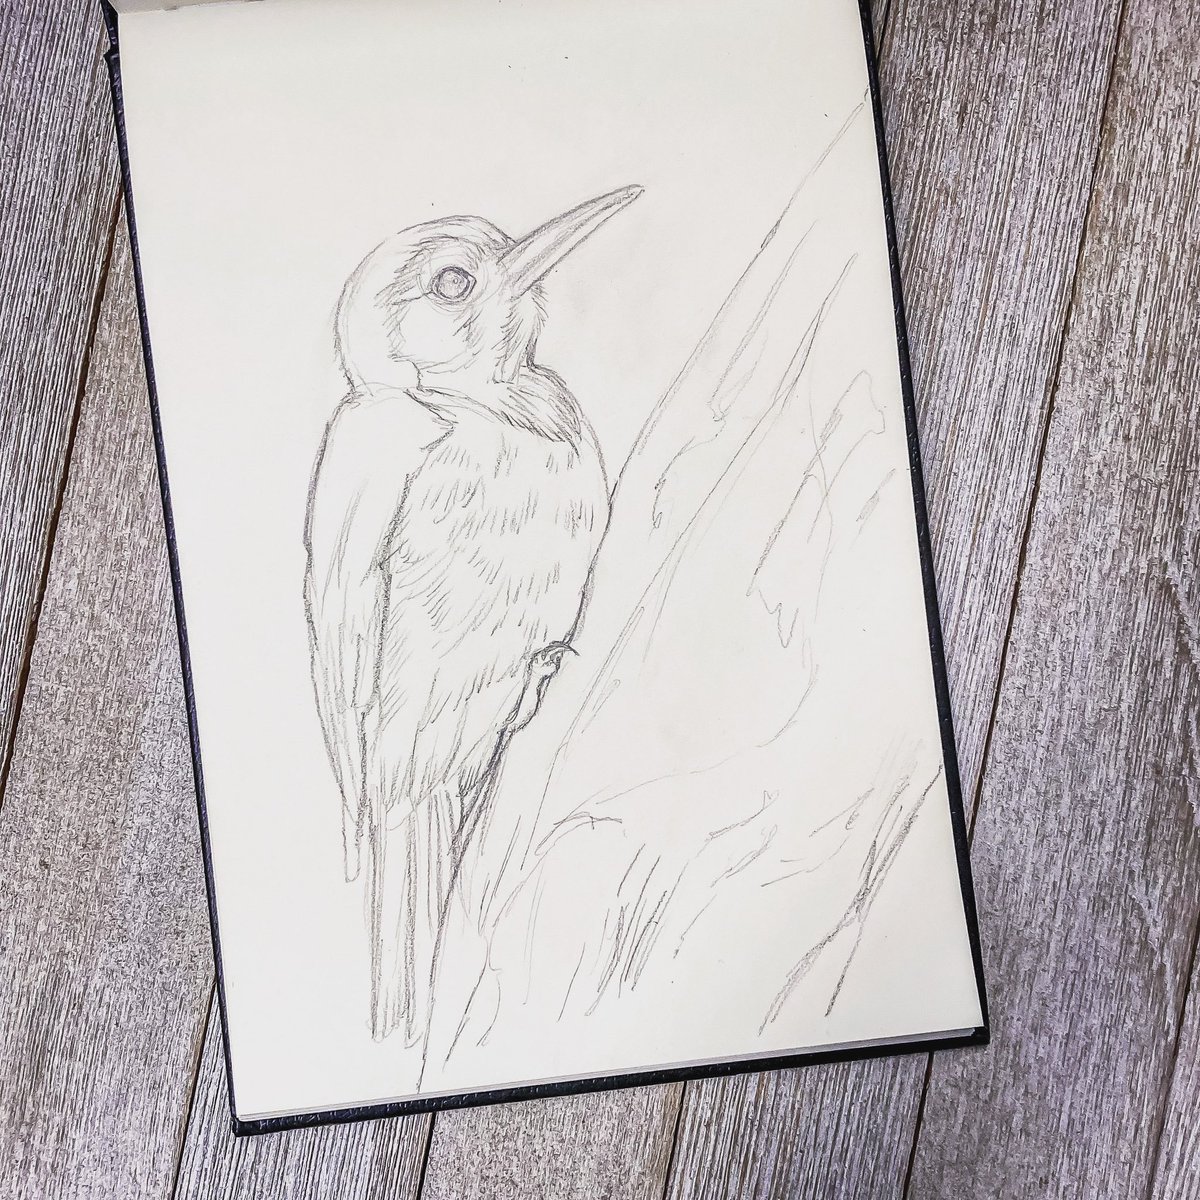 Lunch sketch today. 
.
I’m finally trying to sketch the Redheaded Woodpeckers that I have been seeing.
.
Forming the composition is always my favorite step. 
.
#redheadedwoodpecker #birdstudy #sketchbooktour #workinprogress #backyardwildlife #kywildlife #keepkywild #kyartist